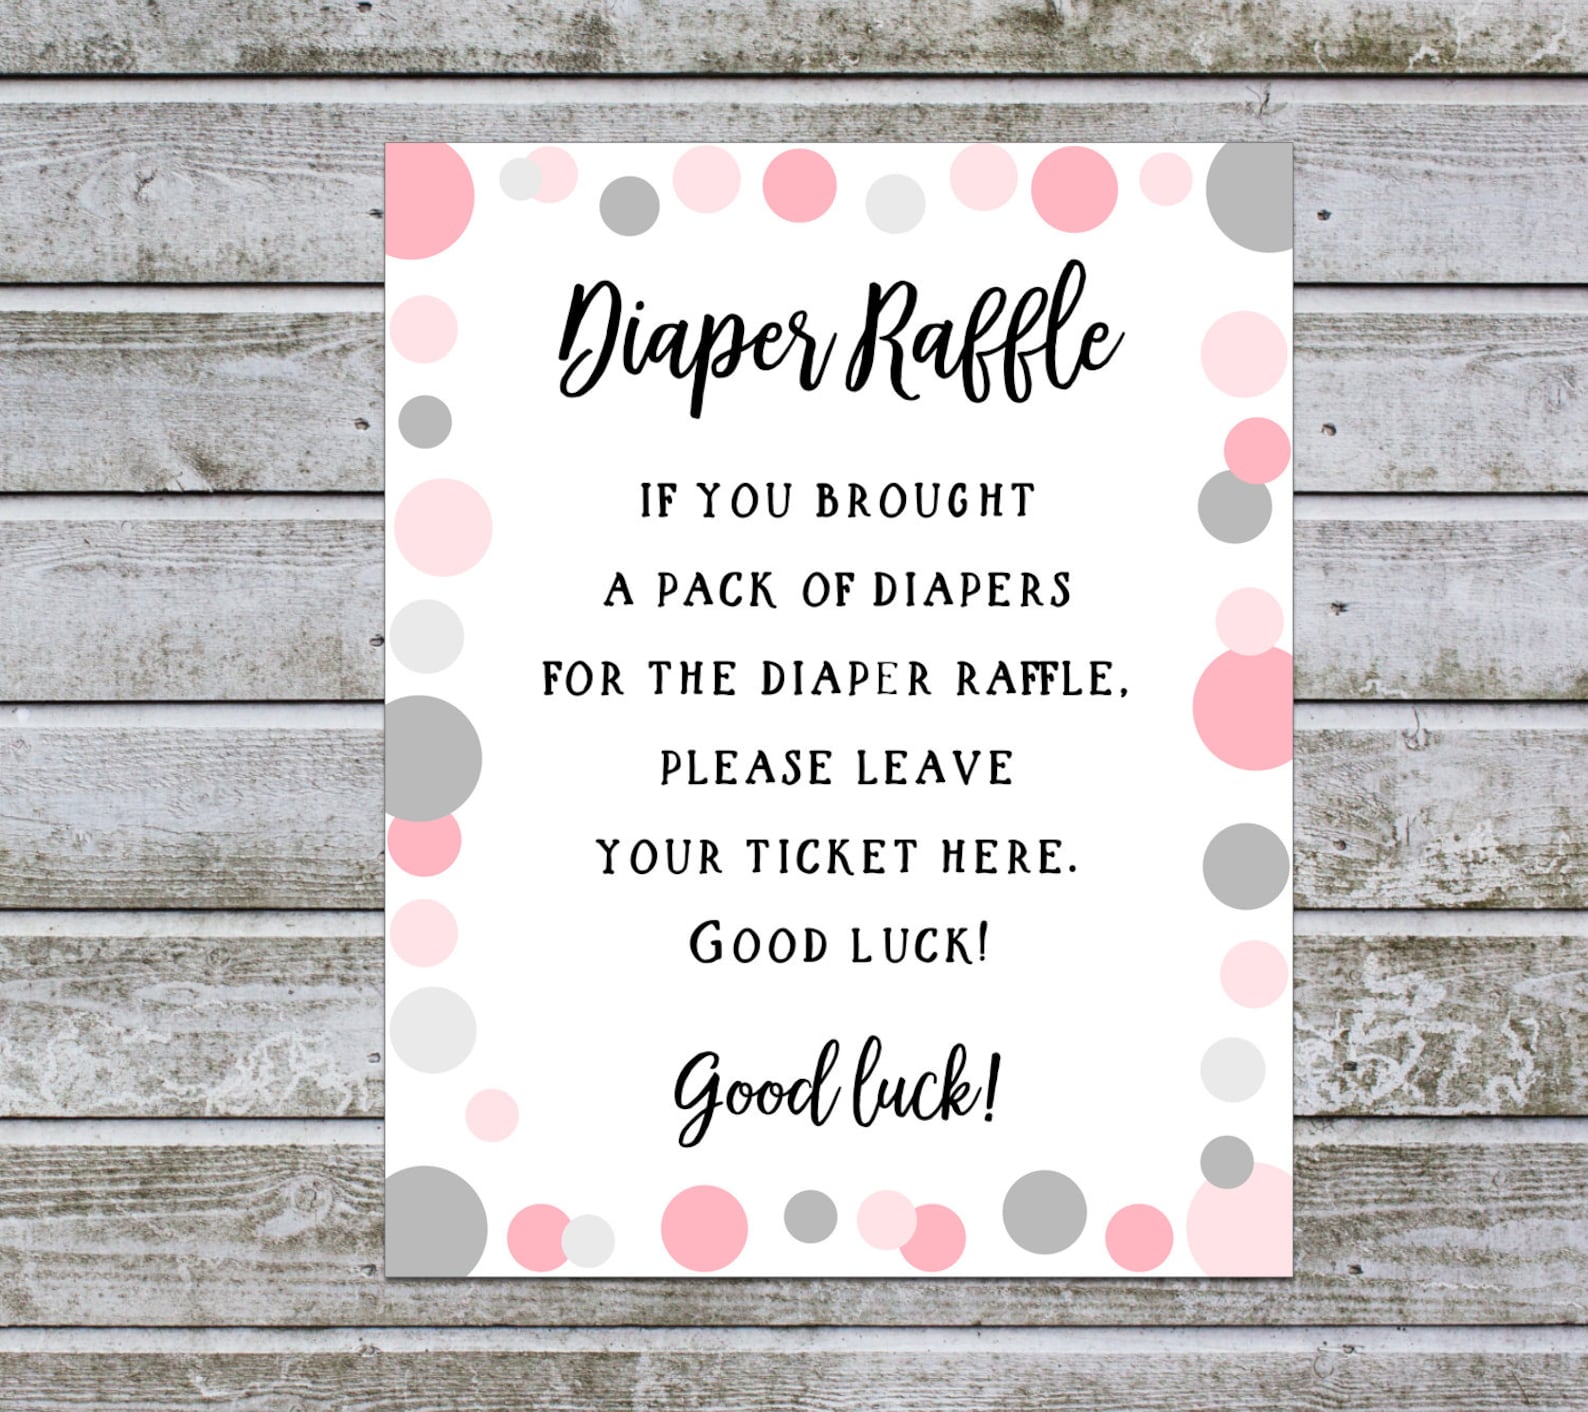 What Is A Diaper Raffle